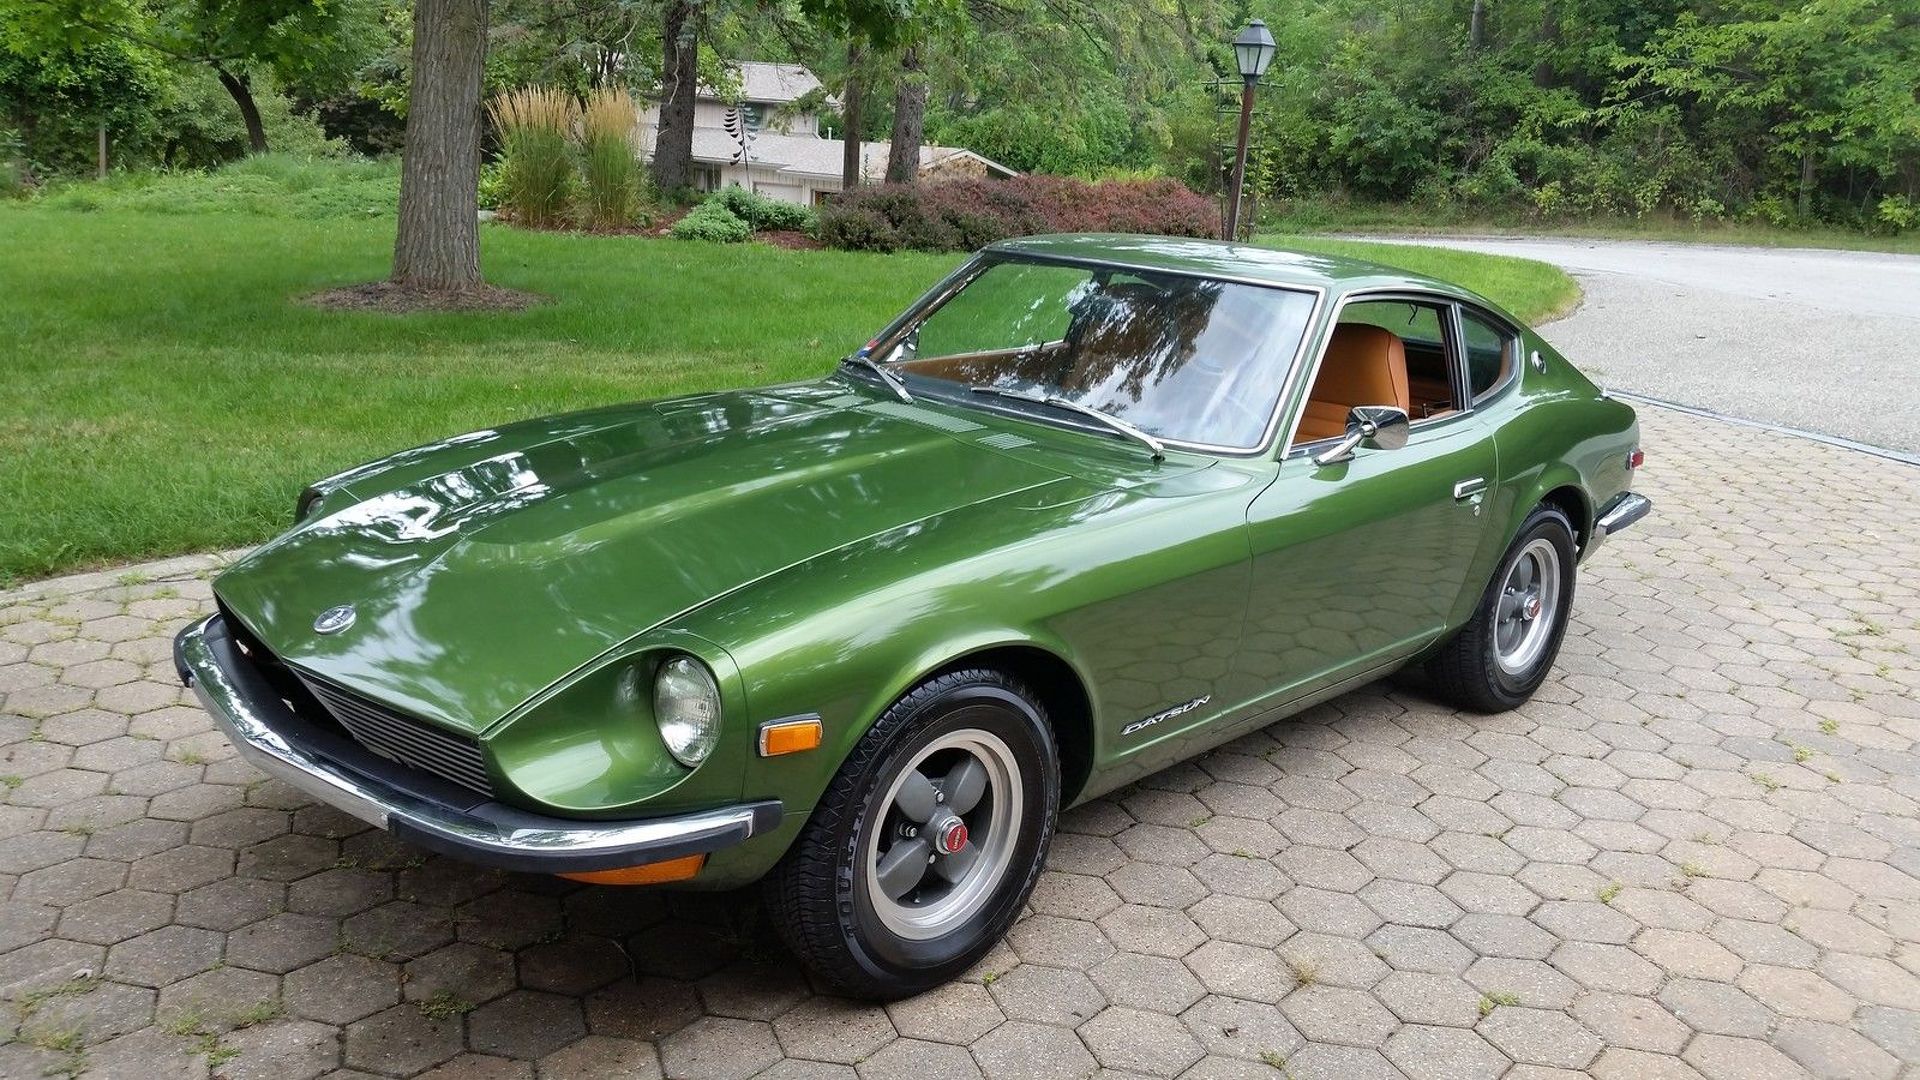 For Sale: Immaculate 1973 Datsun 240Z in the USA - PerformanceDrive